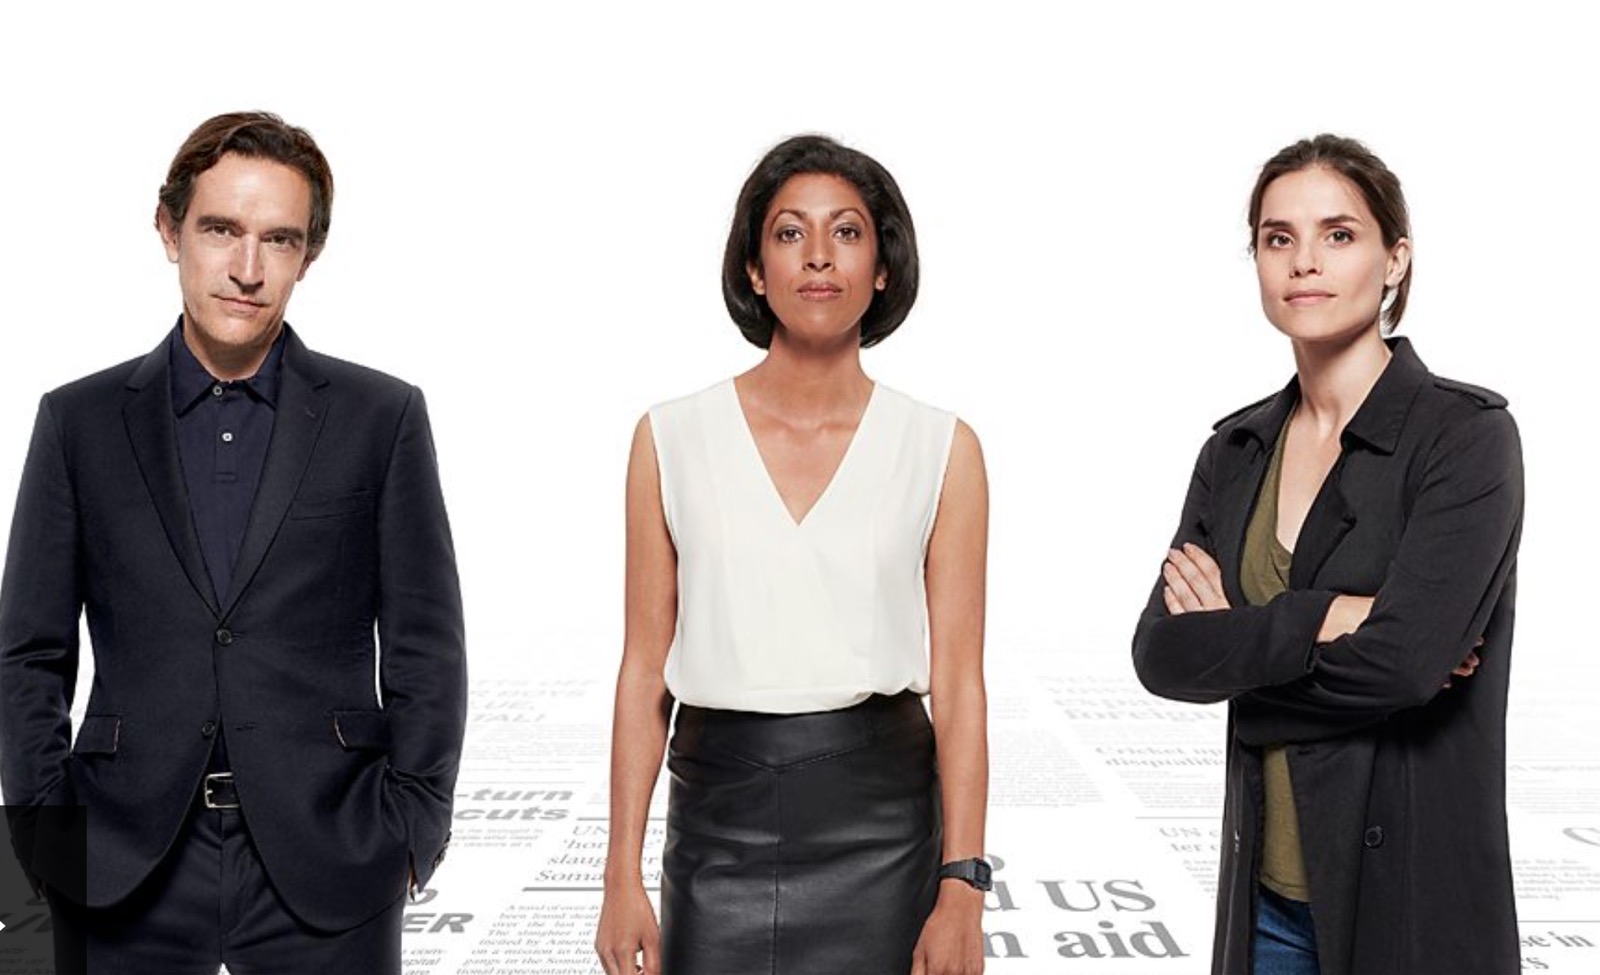 Press - a new BBC drama set in a newsroom - gets a trailer